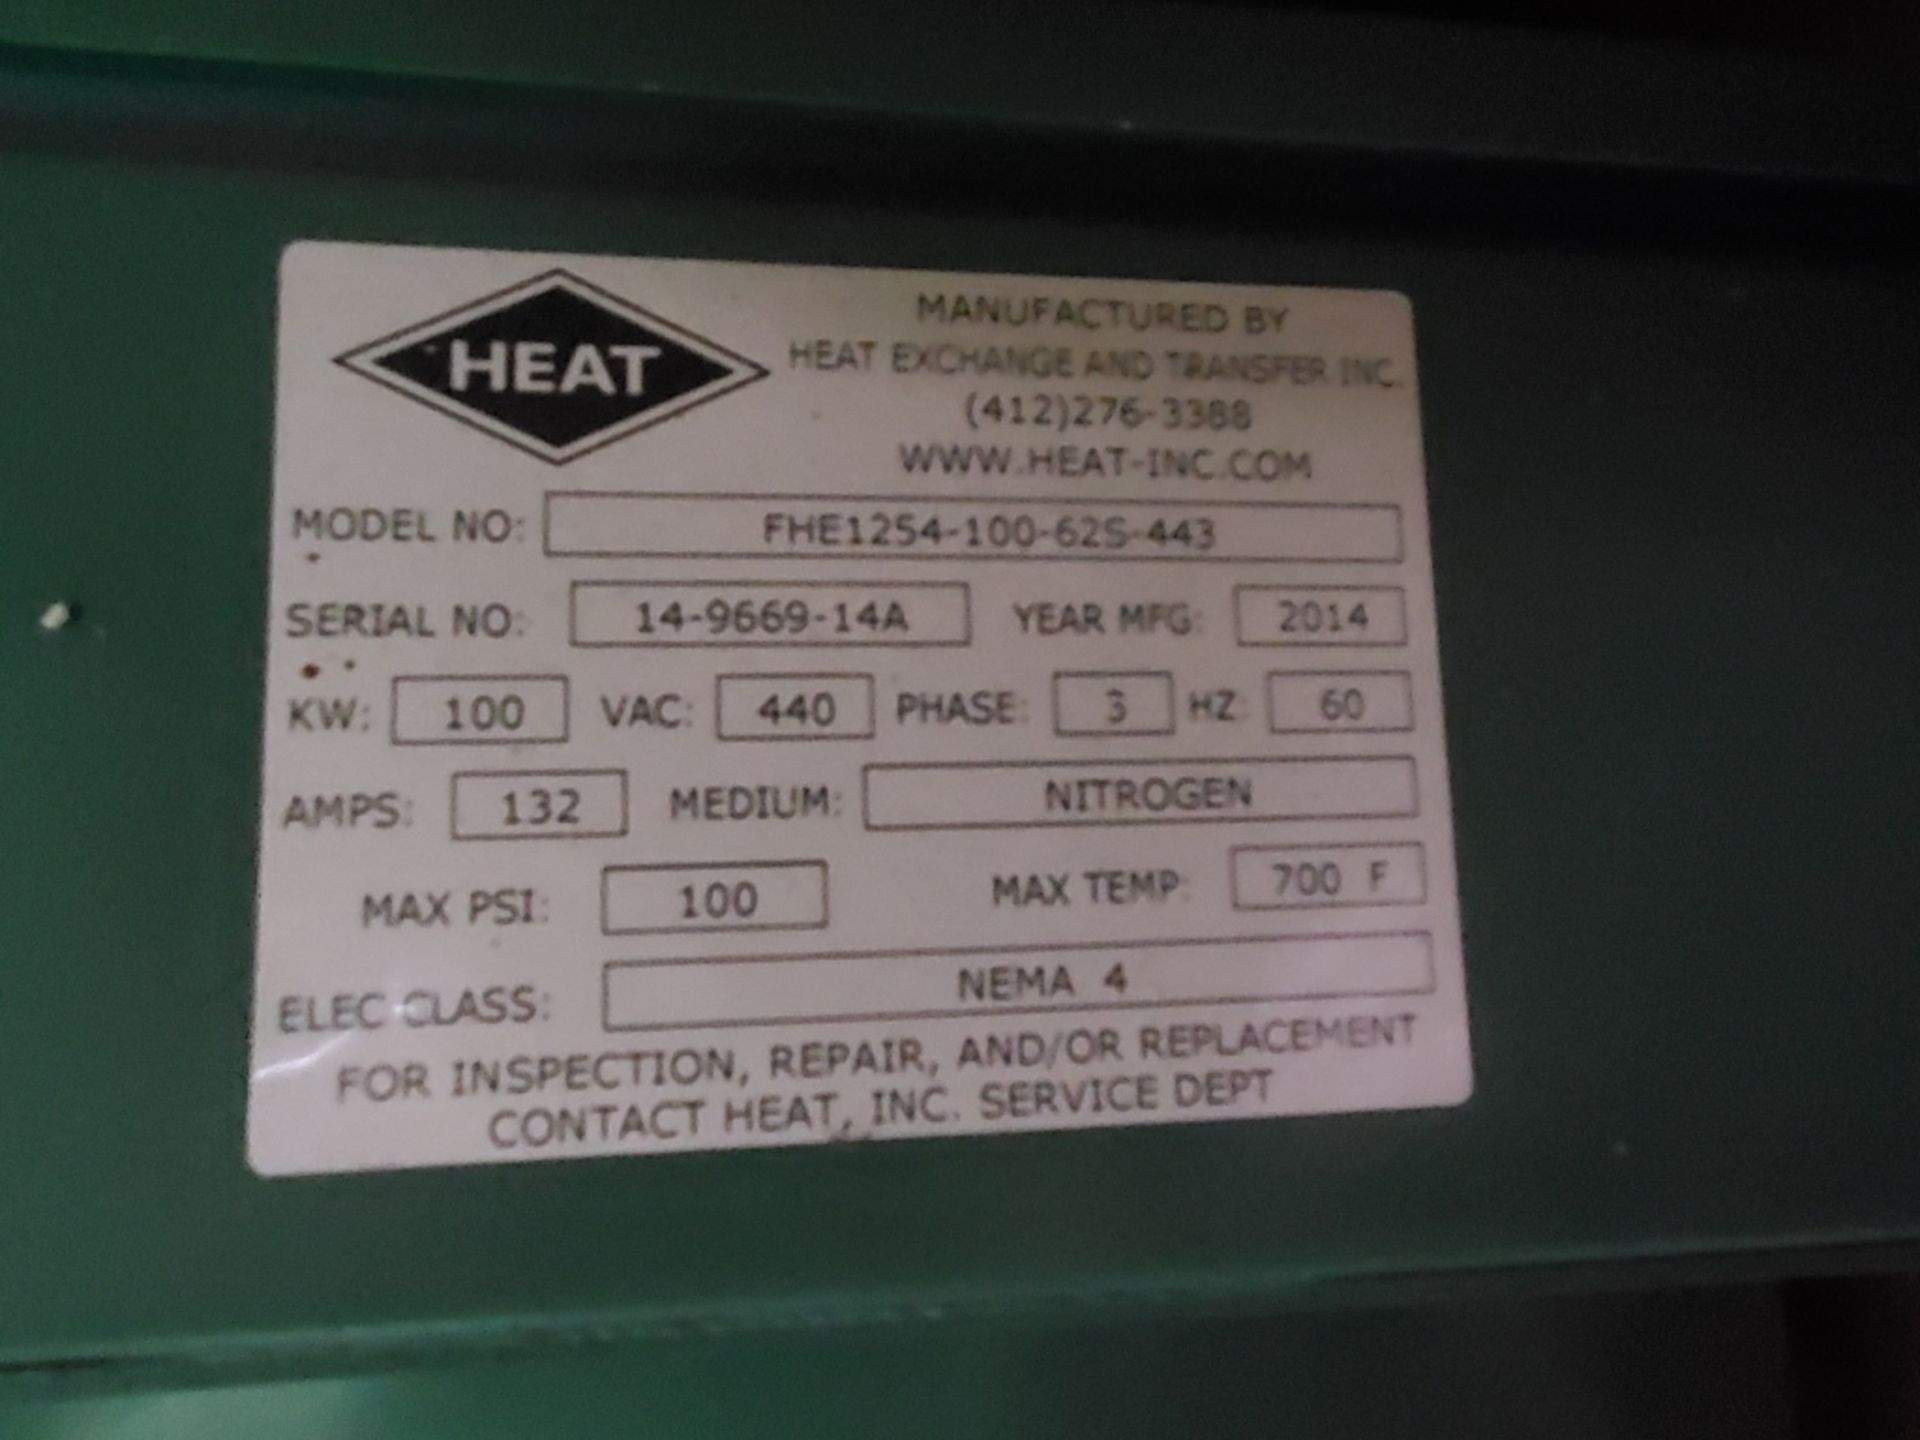 2014 Heat Exchange and Transfer Heating Element - Image 5 of 6